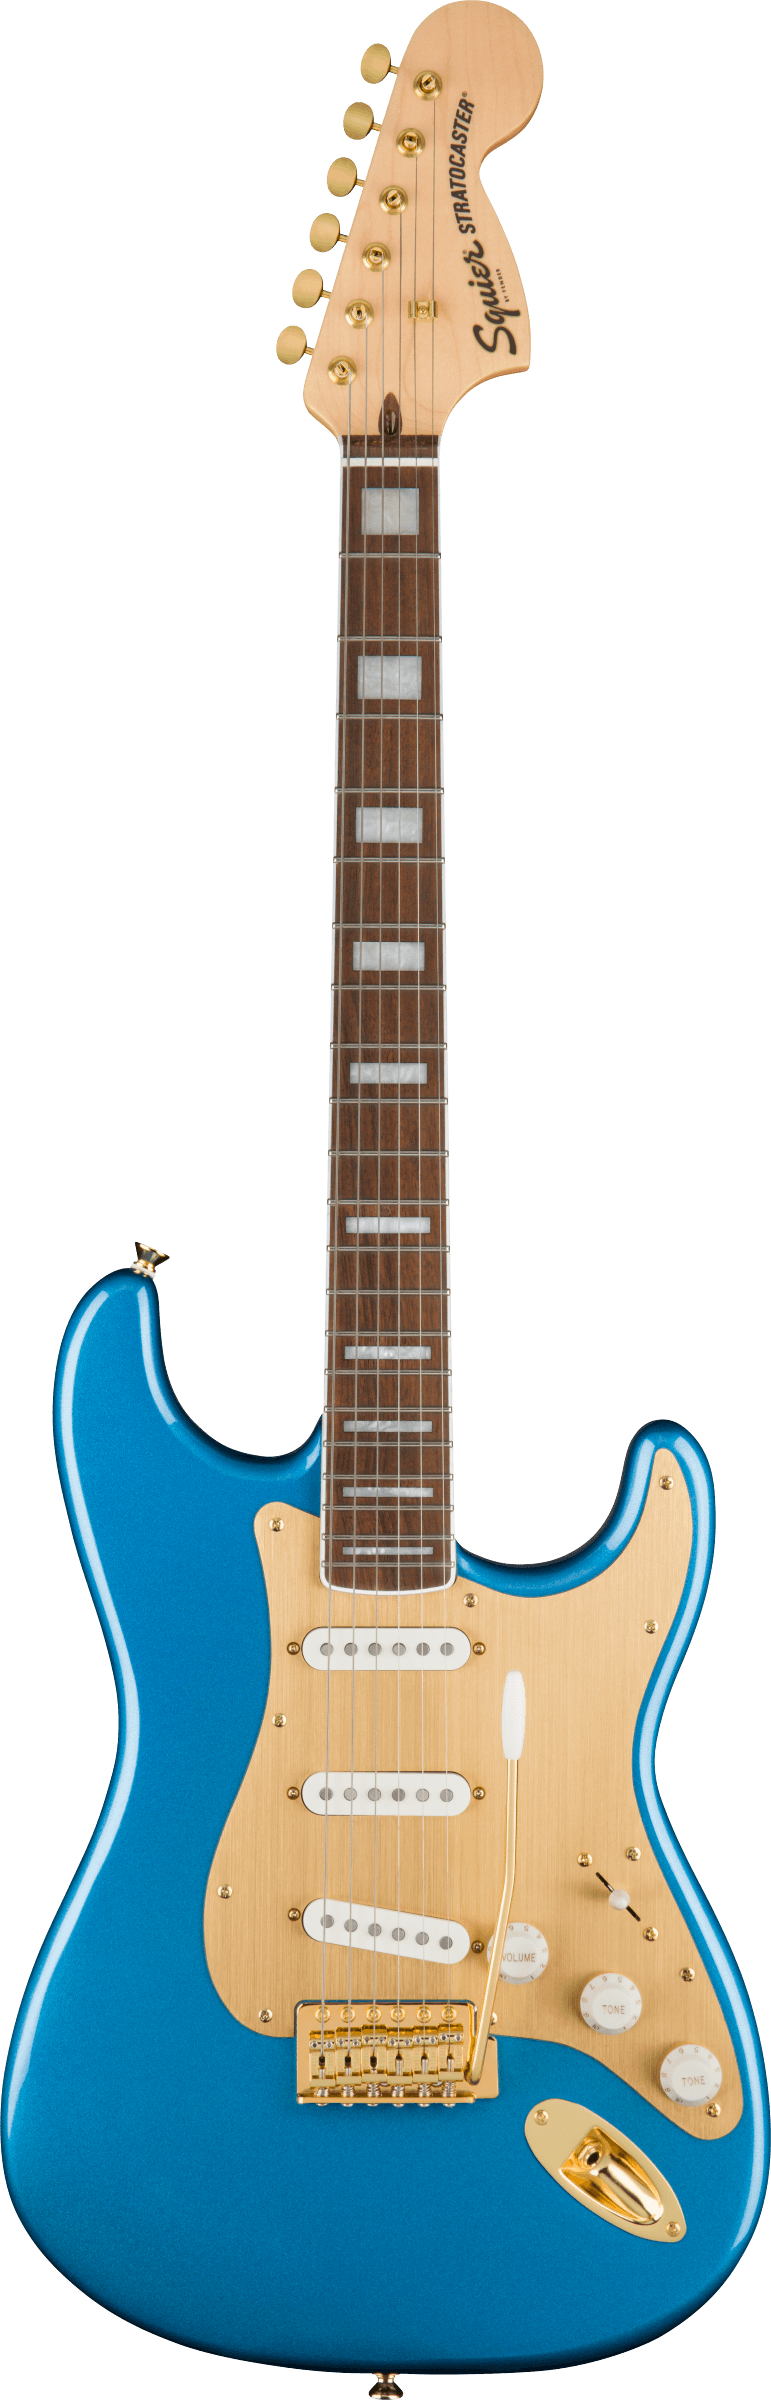 Squier 40TH Anniversary Stratocaster Gold Edition - Lake Placid Blue - Joondalup Music Centre